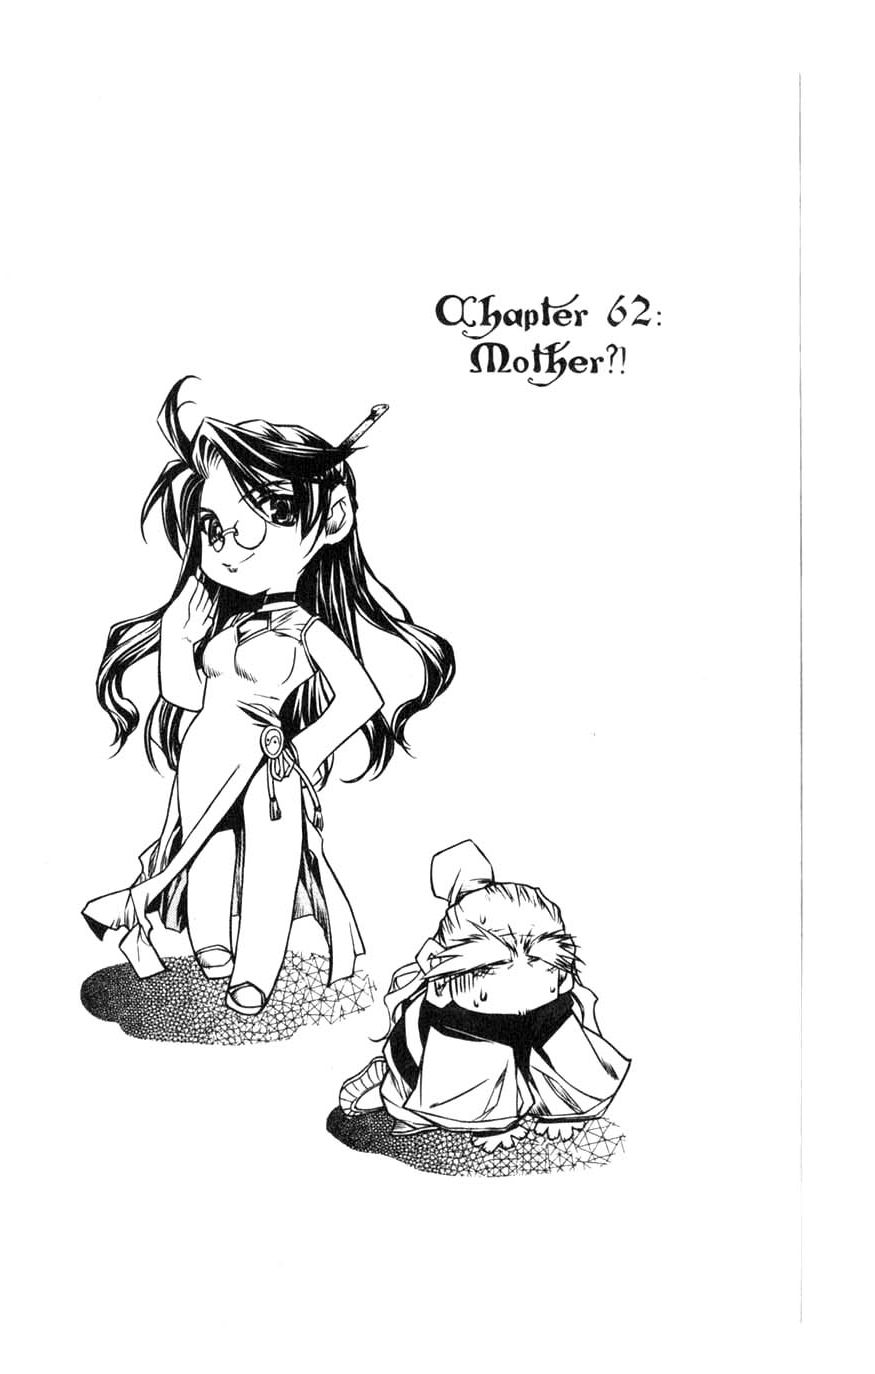 Chronicles of the Cursed Sword Vol. 15 Ch. 62 Mother?!